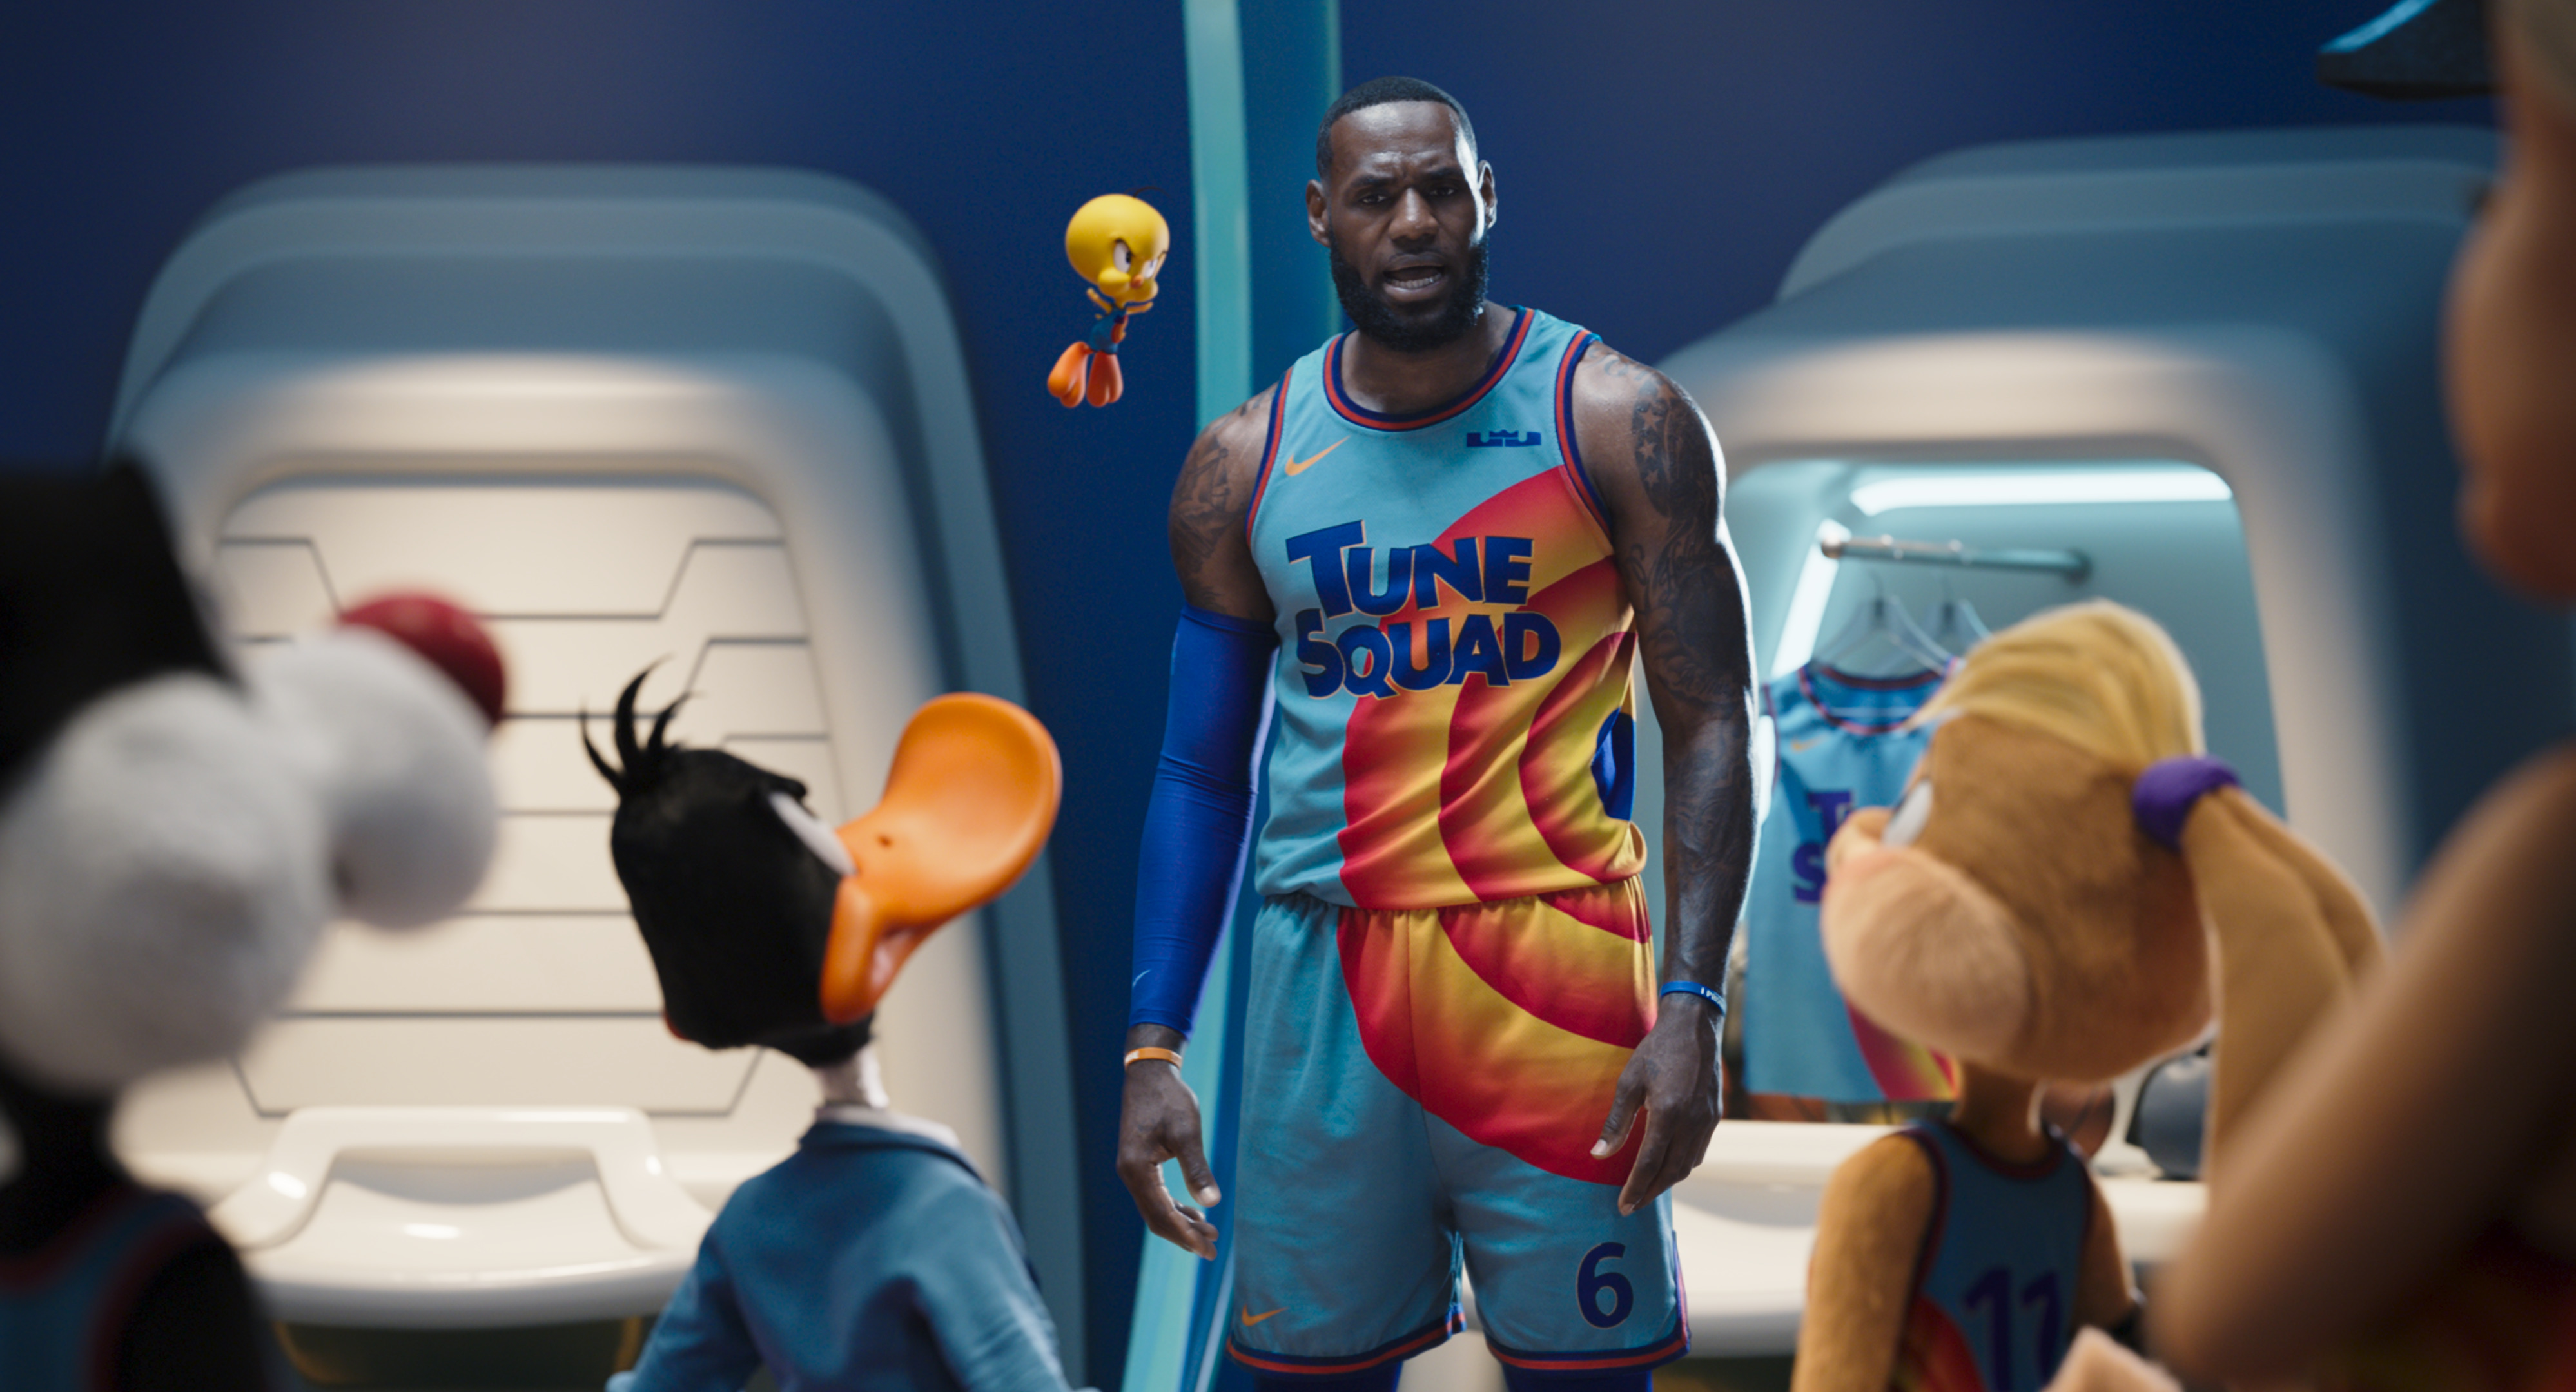 The Story Behind the Tune Squad and Goon Squad Jerseys Featured in ‘Space Jam: A New Legacy’